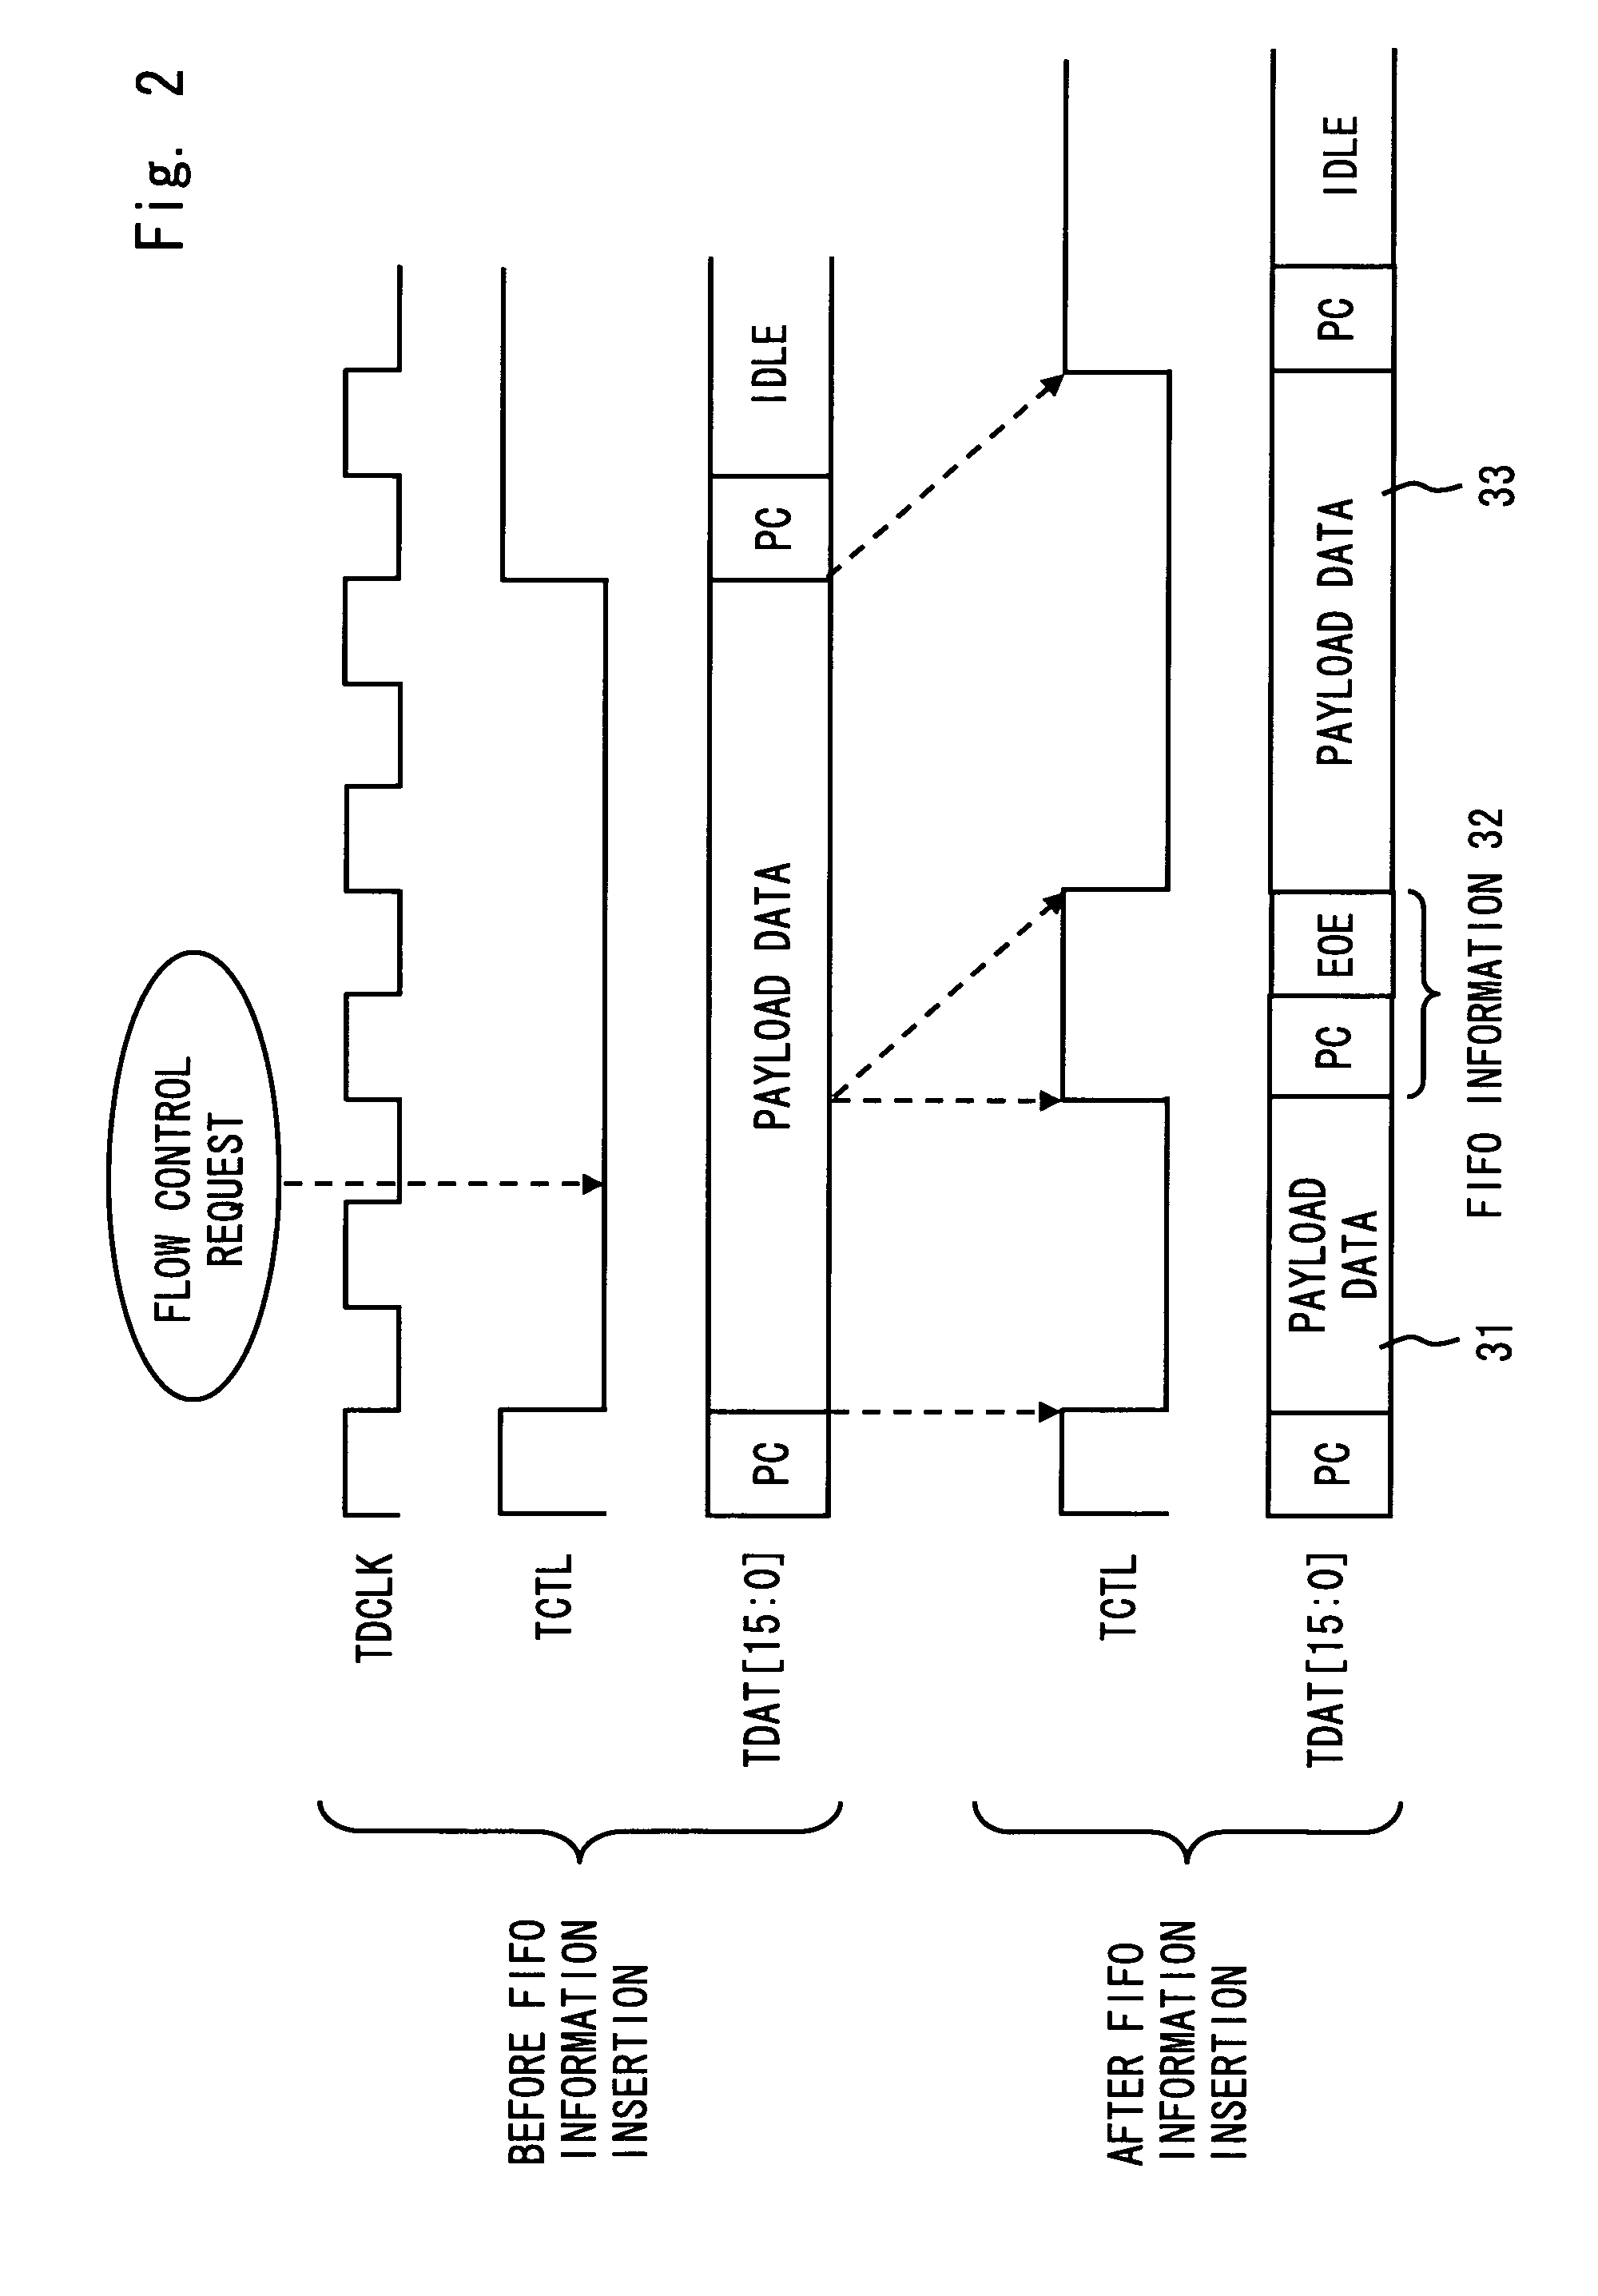 Communication system, communication device and flow control based on status information of data buffer usage